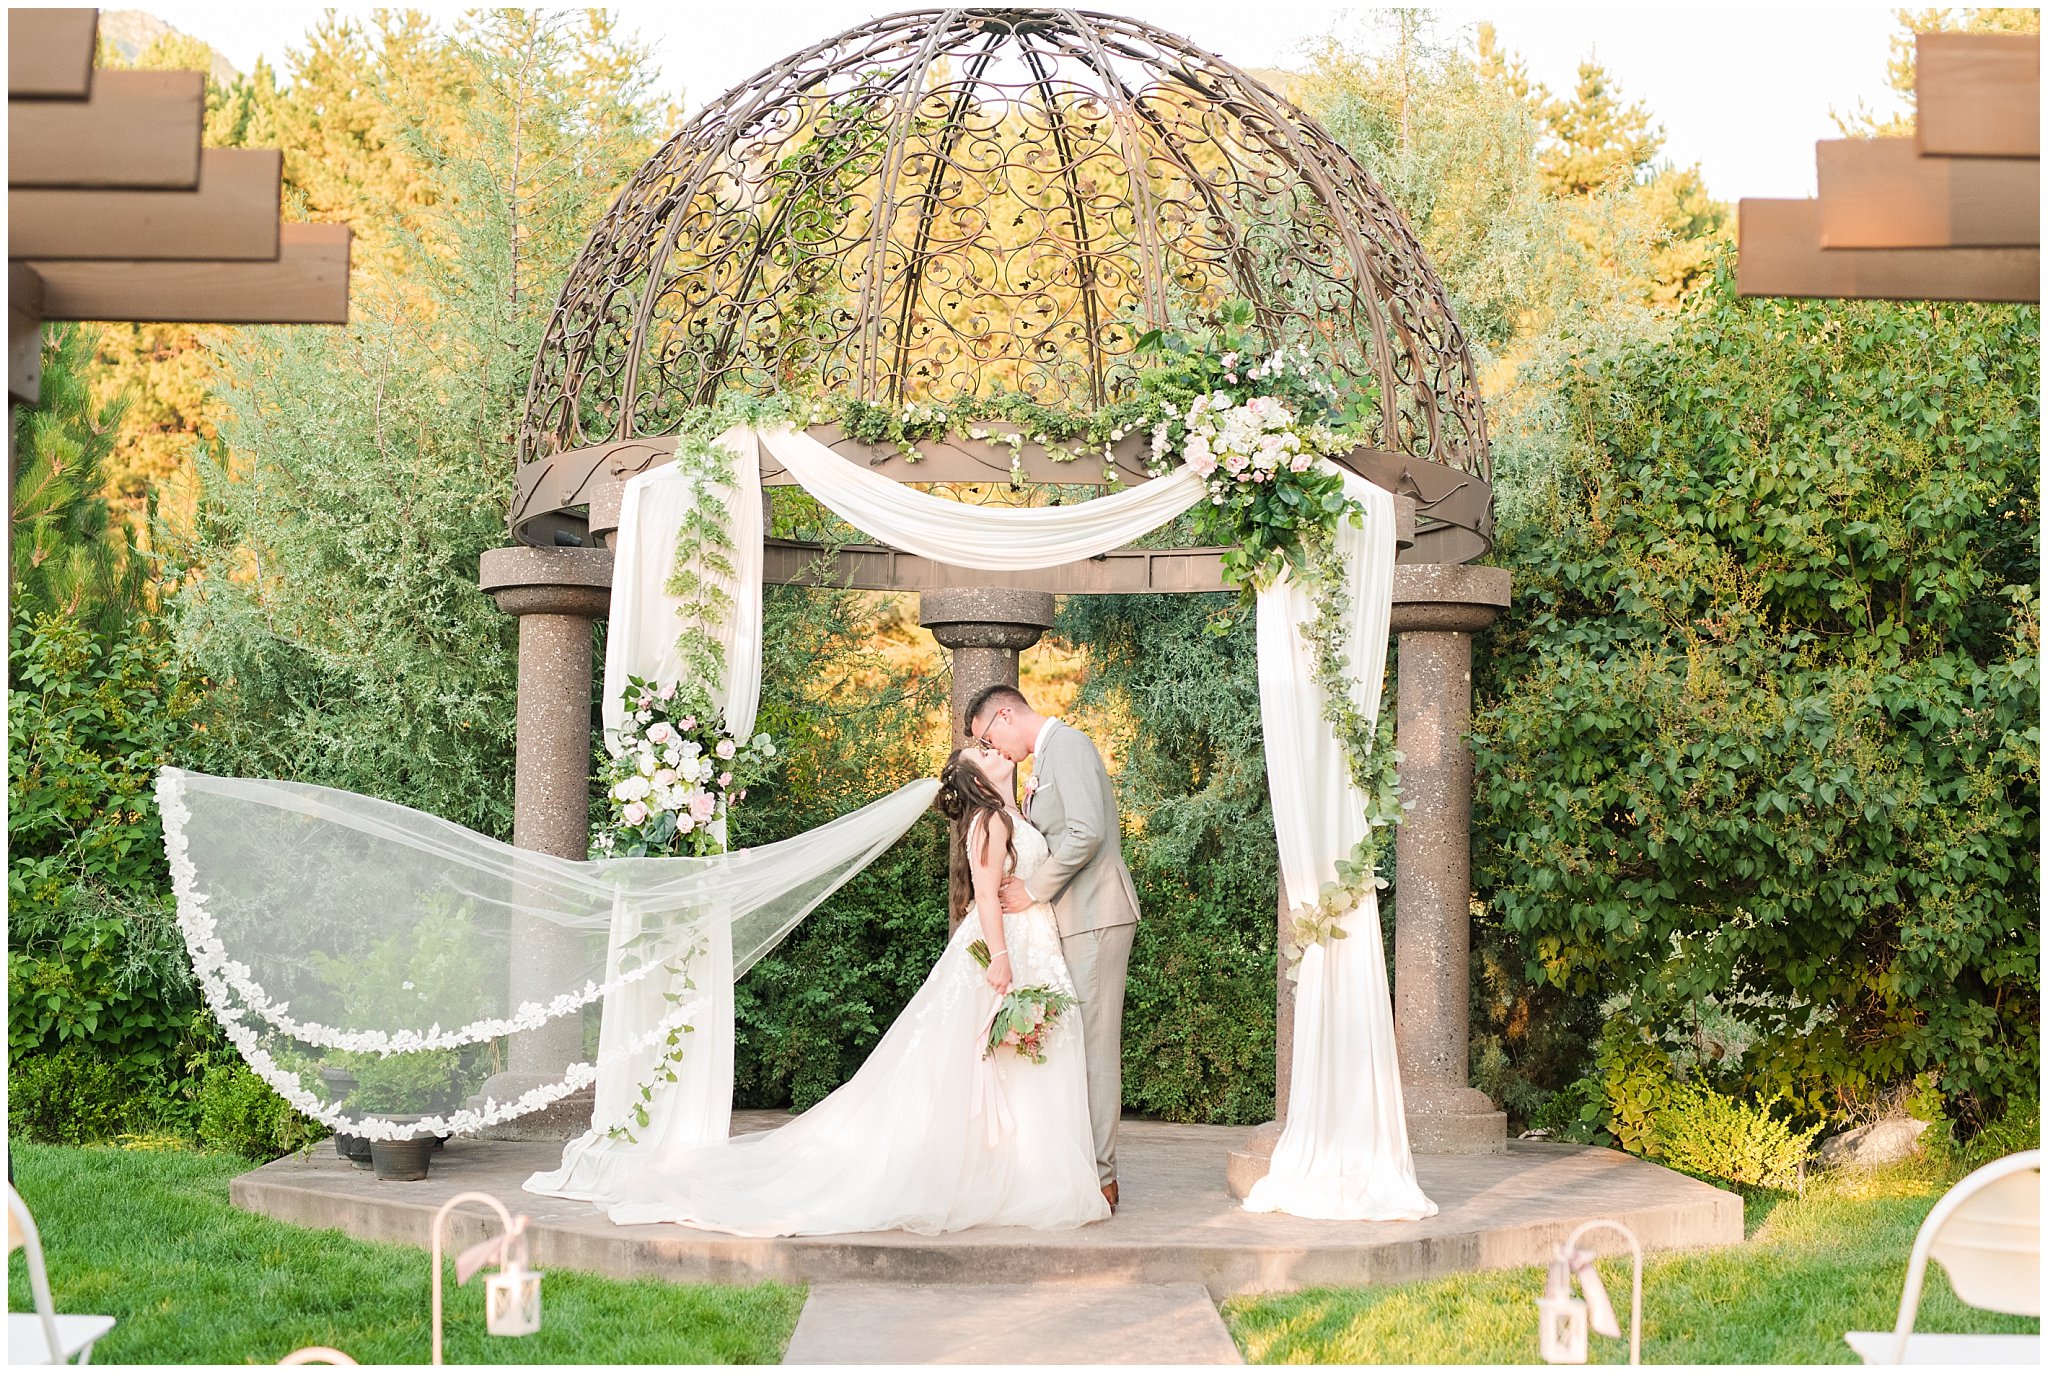 Bride and groom in gray suit with blush tie in front of the ceremony site arch | Oak Hills Utah Dusty Rose and Gray Summer Wedding | Jessie and Dallin Photography